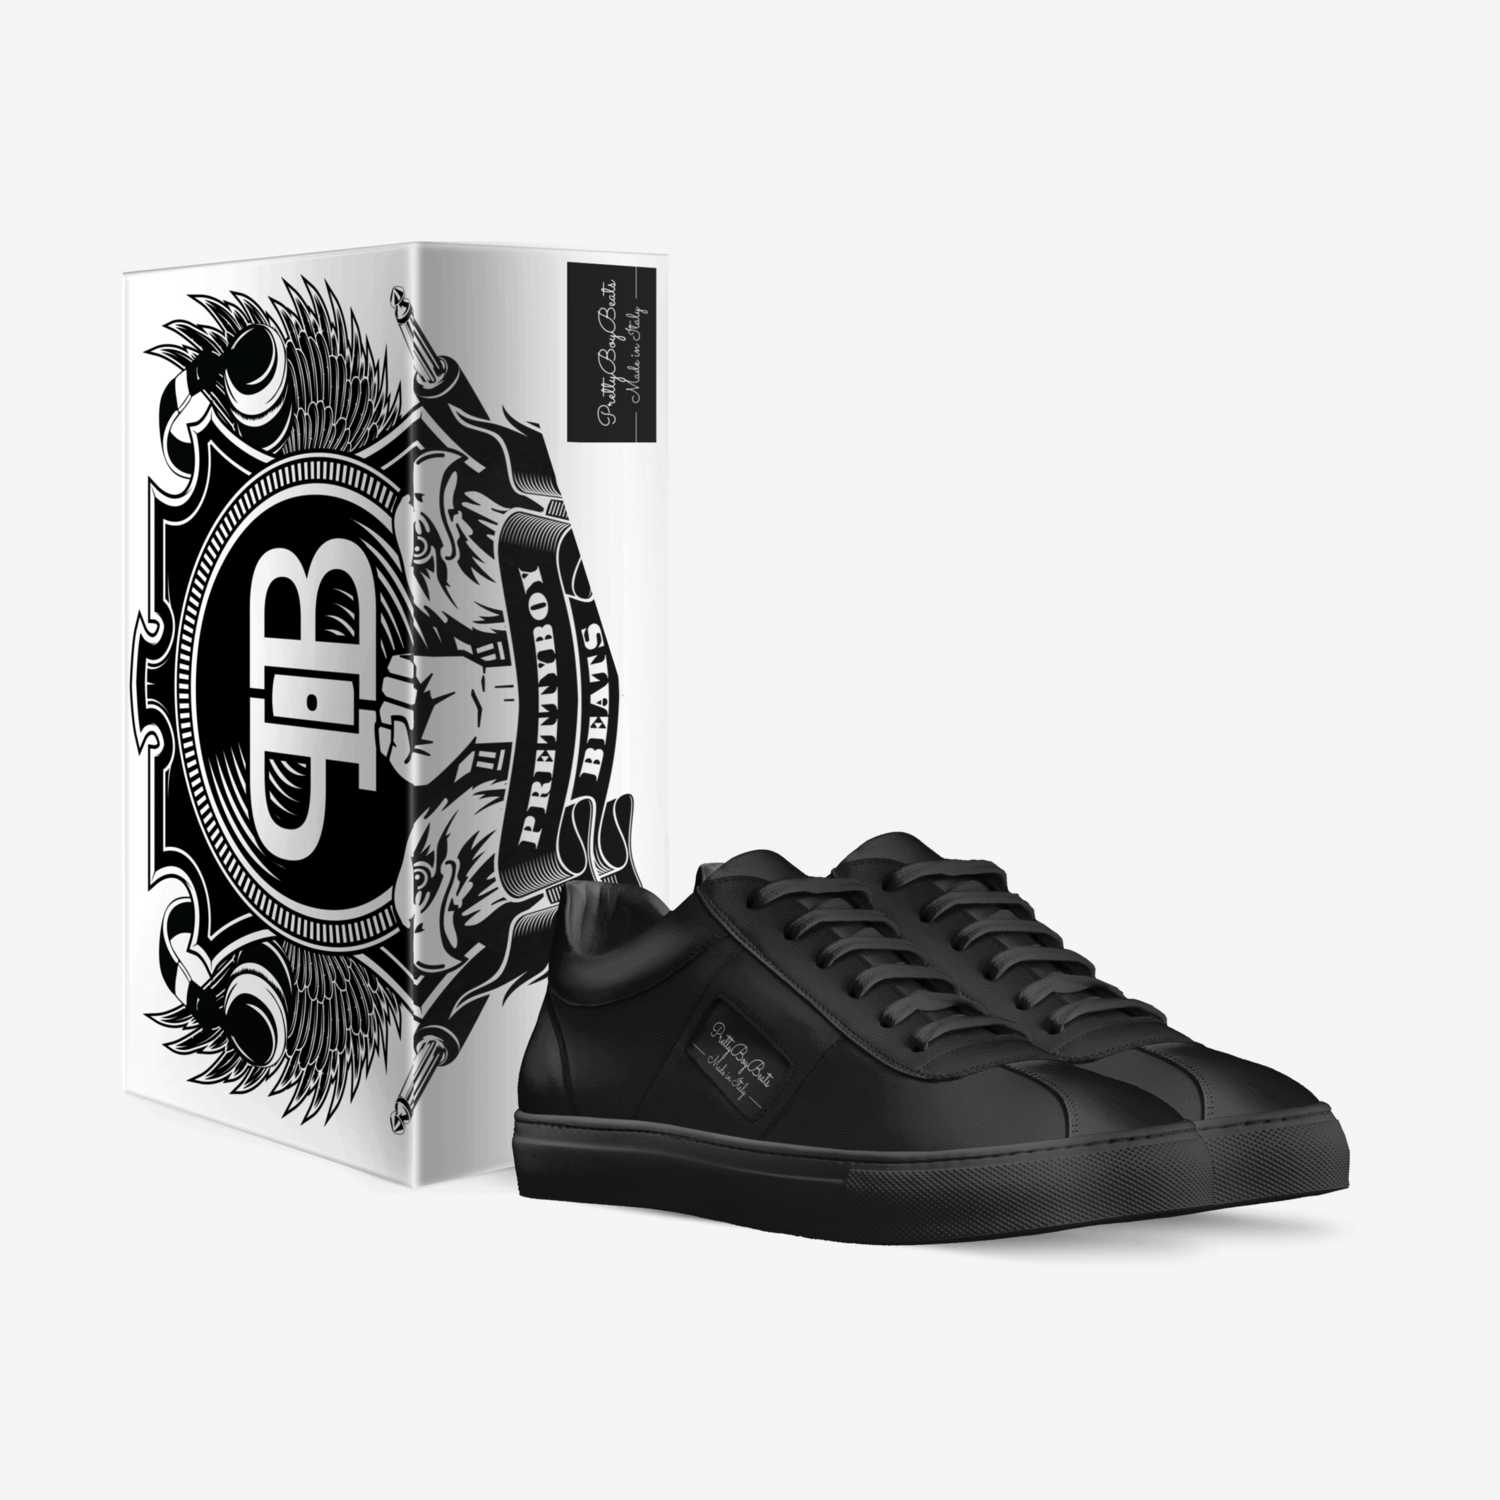 PrettyBoyBeats custom made in Italy shoes by George Seals | Box view